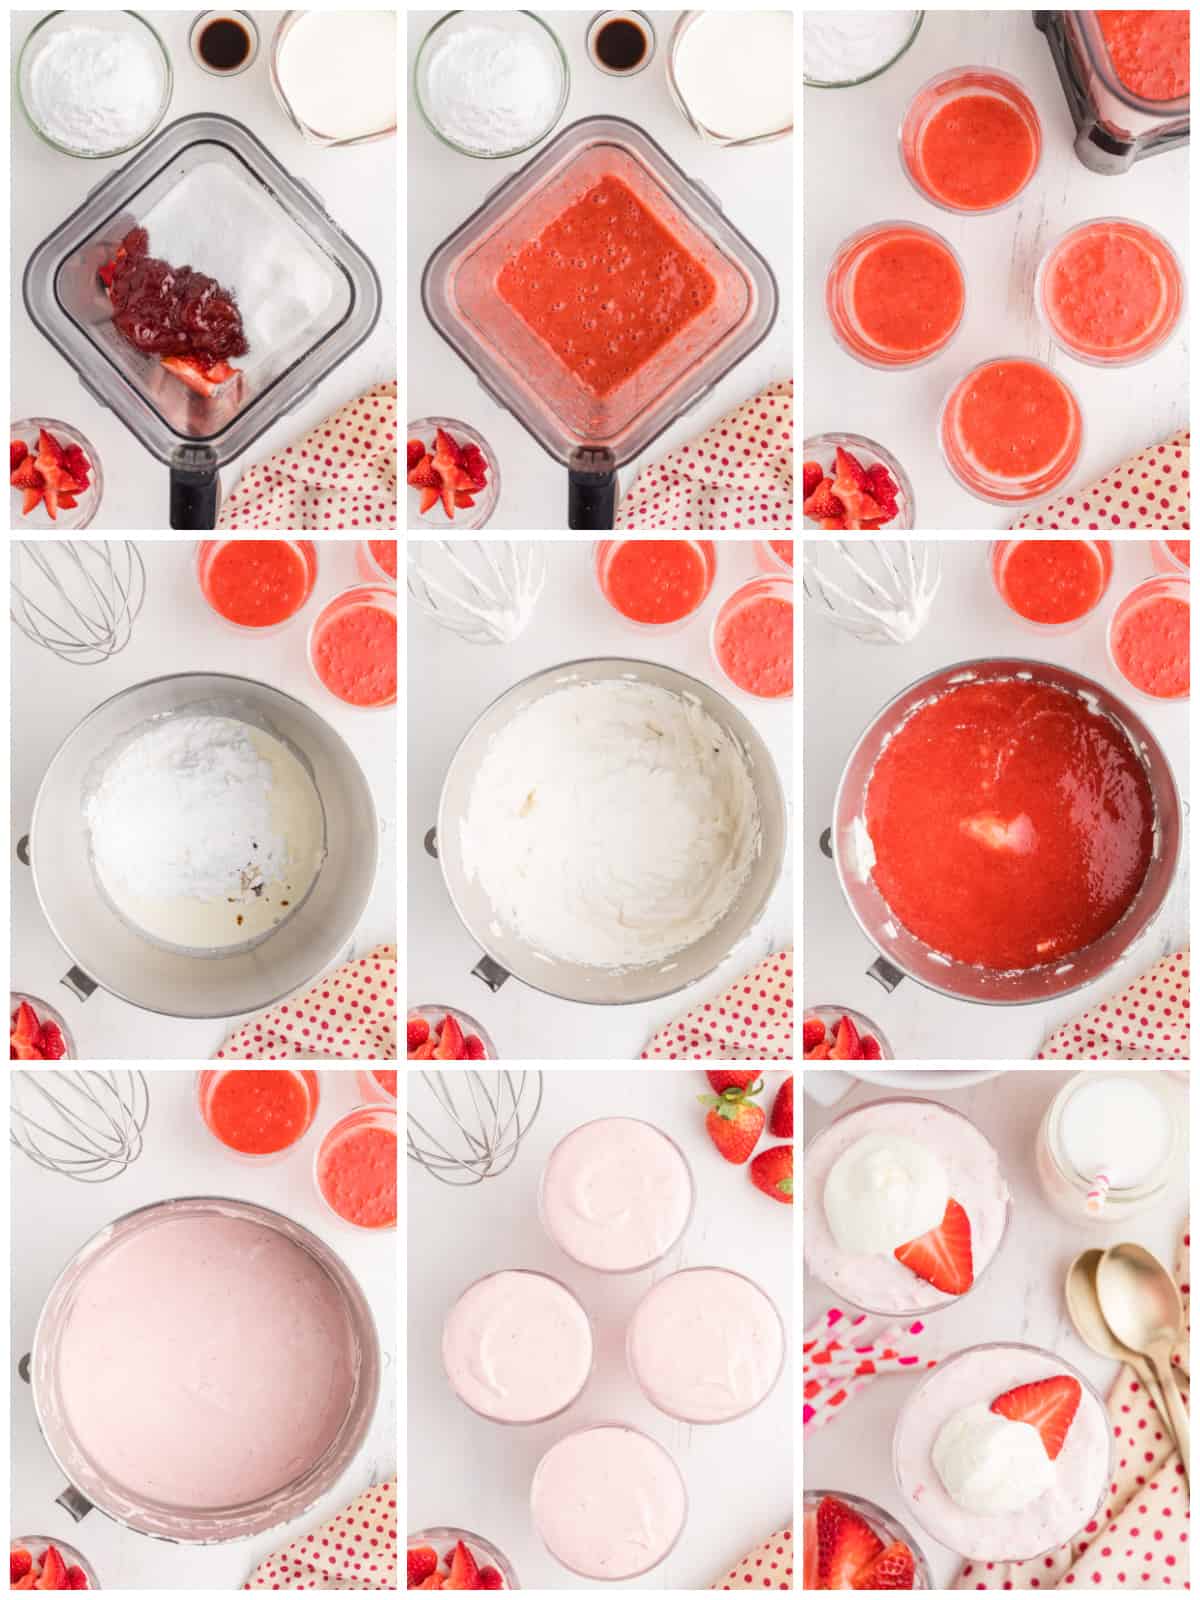 Step by step photos on how to make Strawberry Mousse.